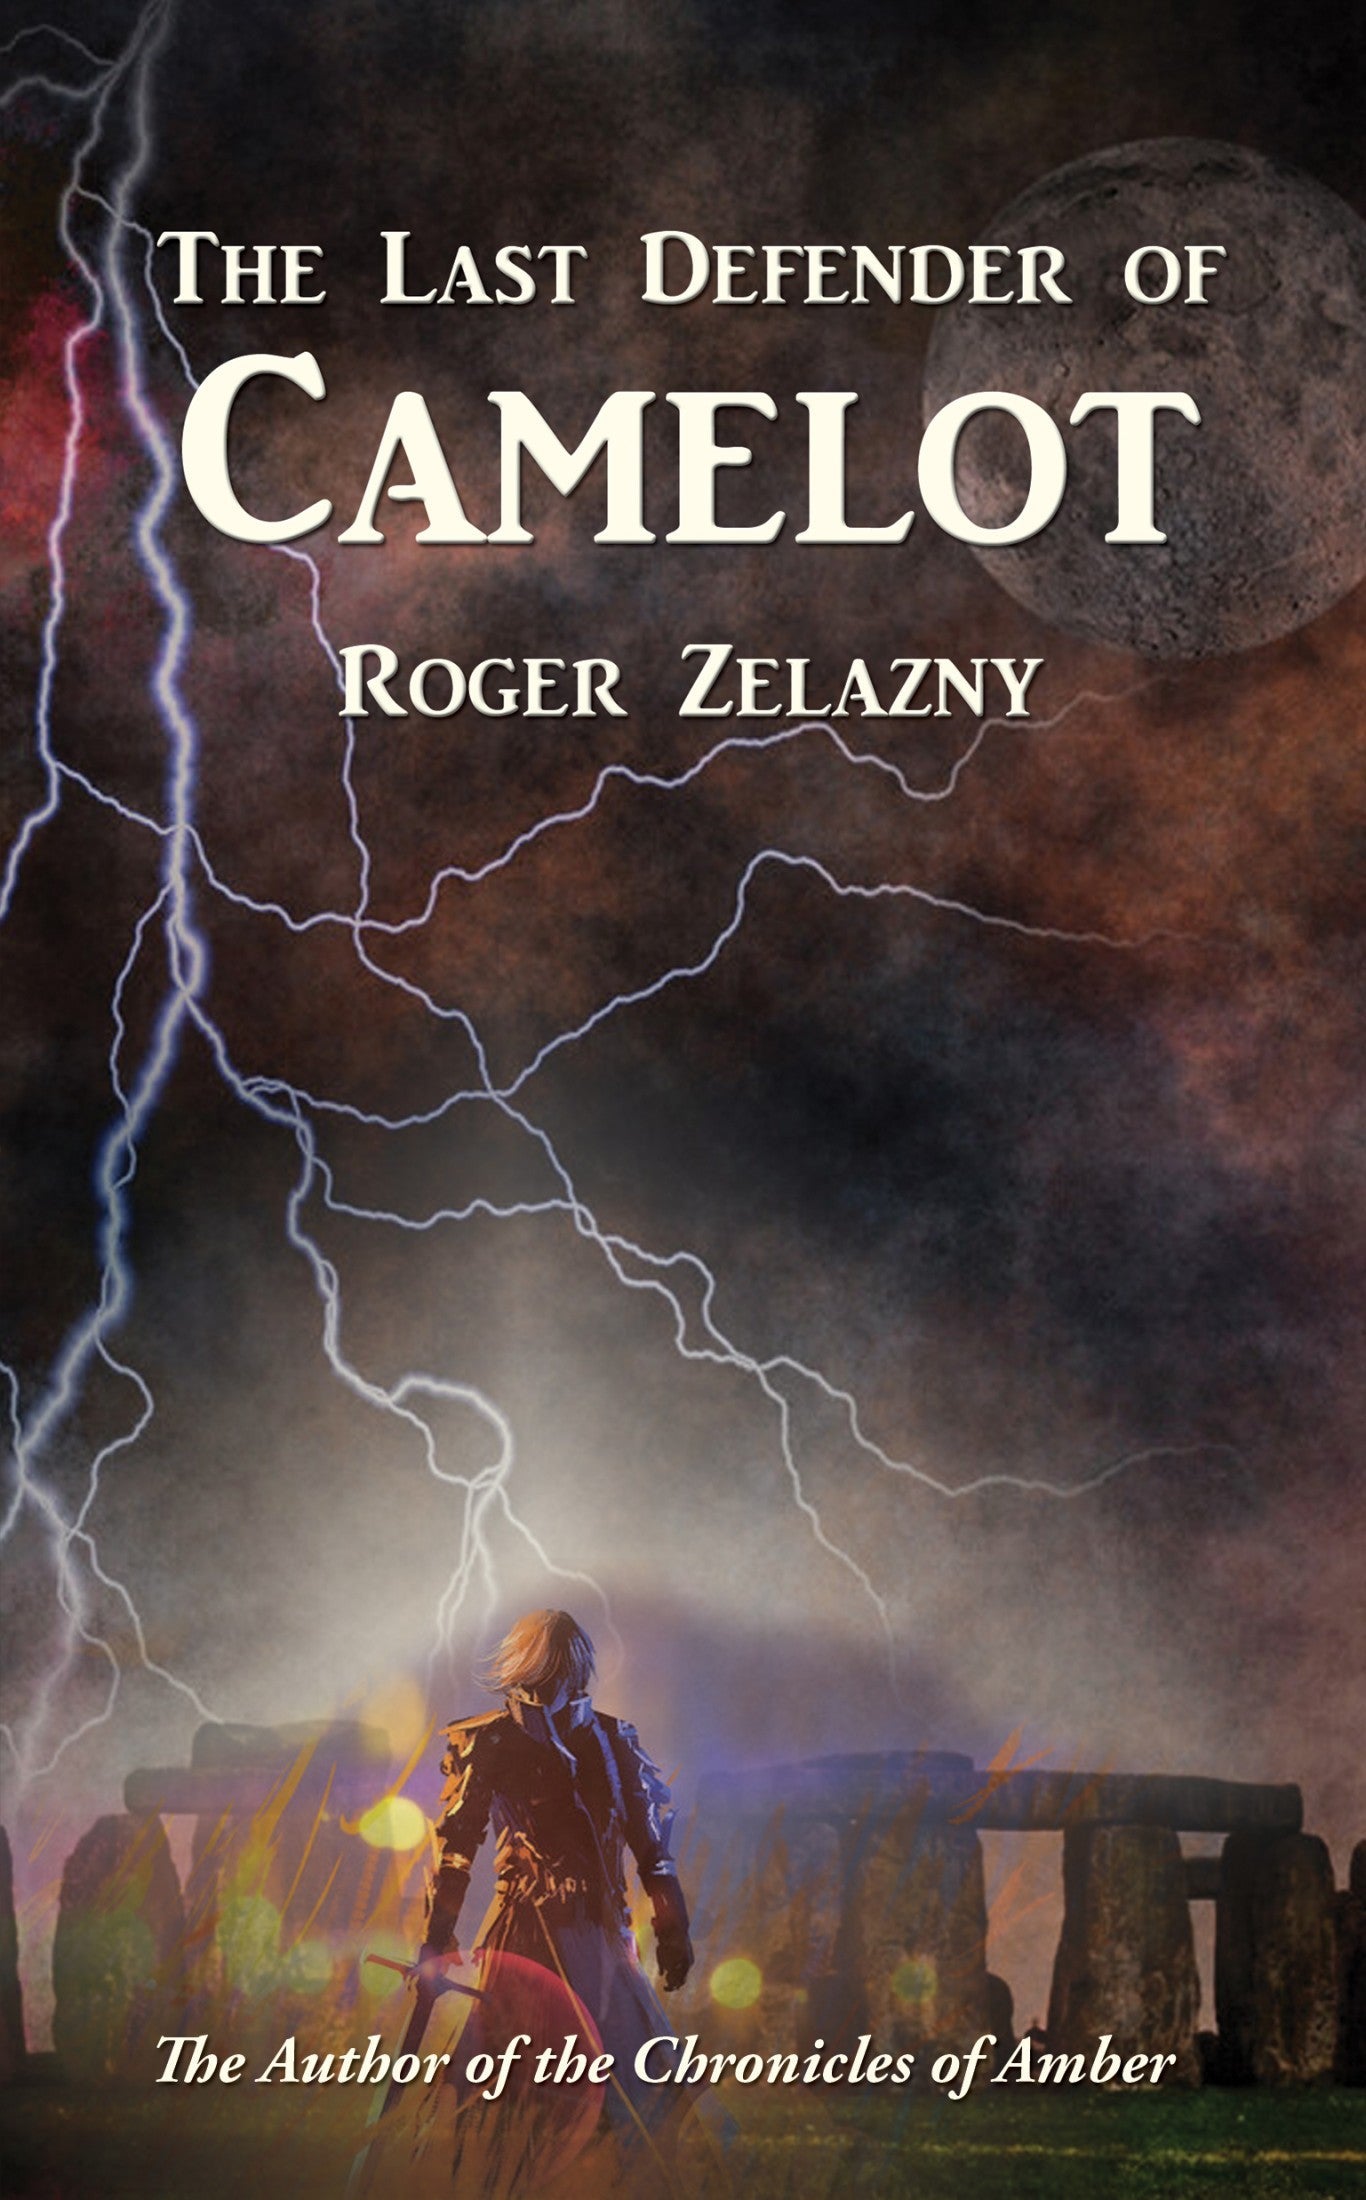 Cover art for The Last Defender of Camelot.